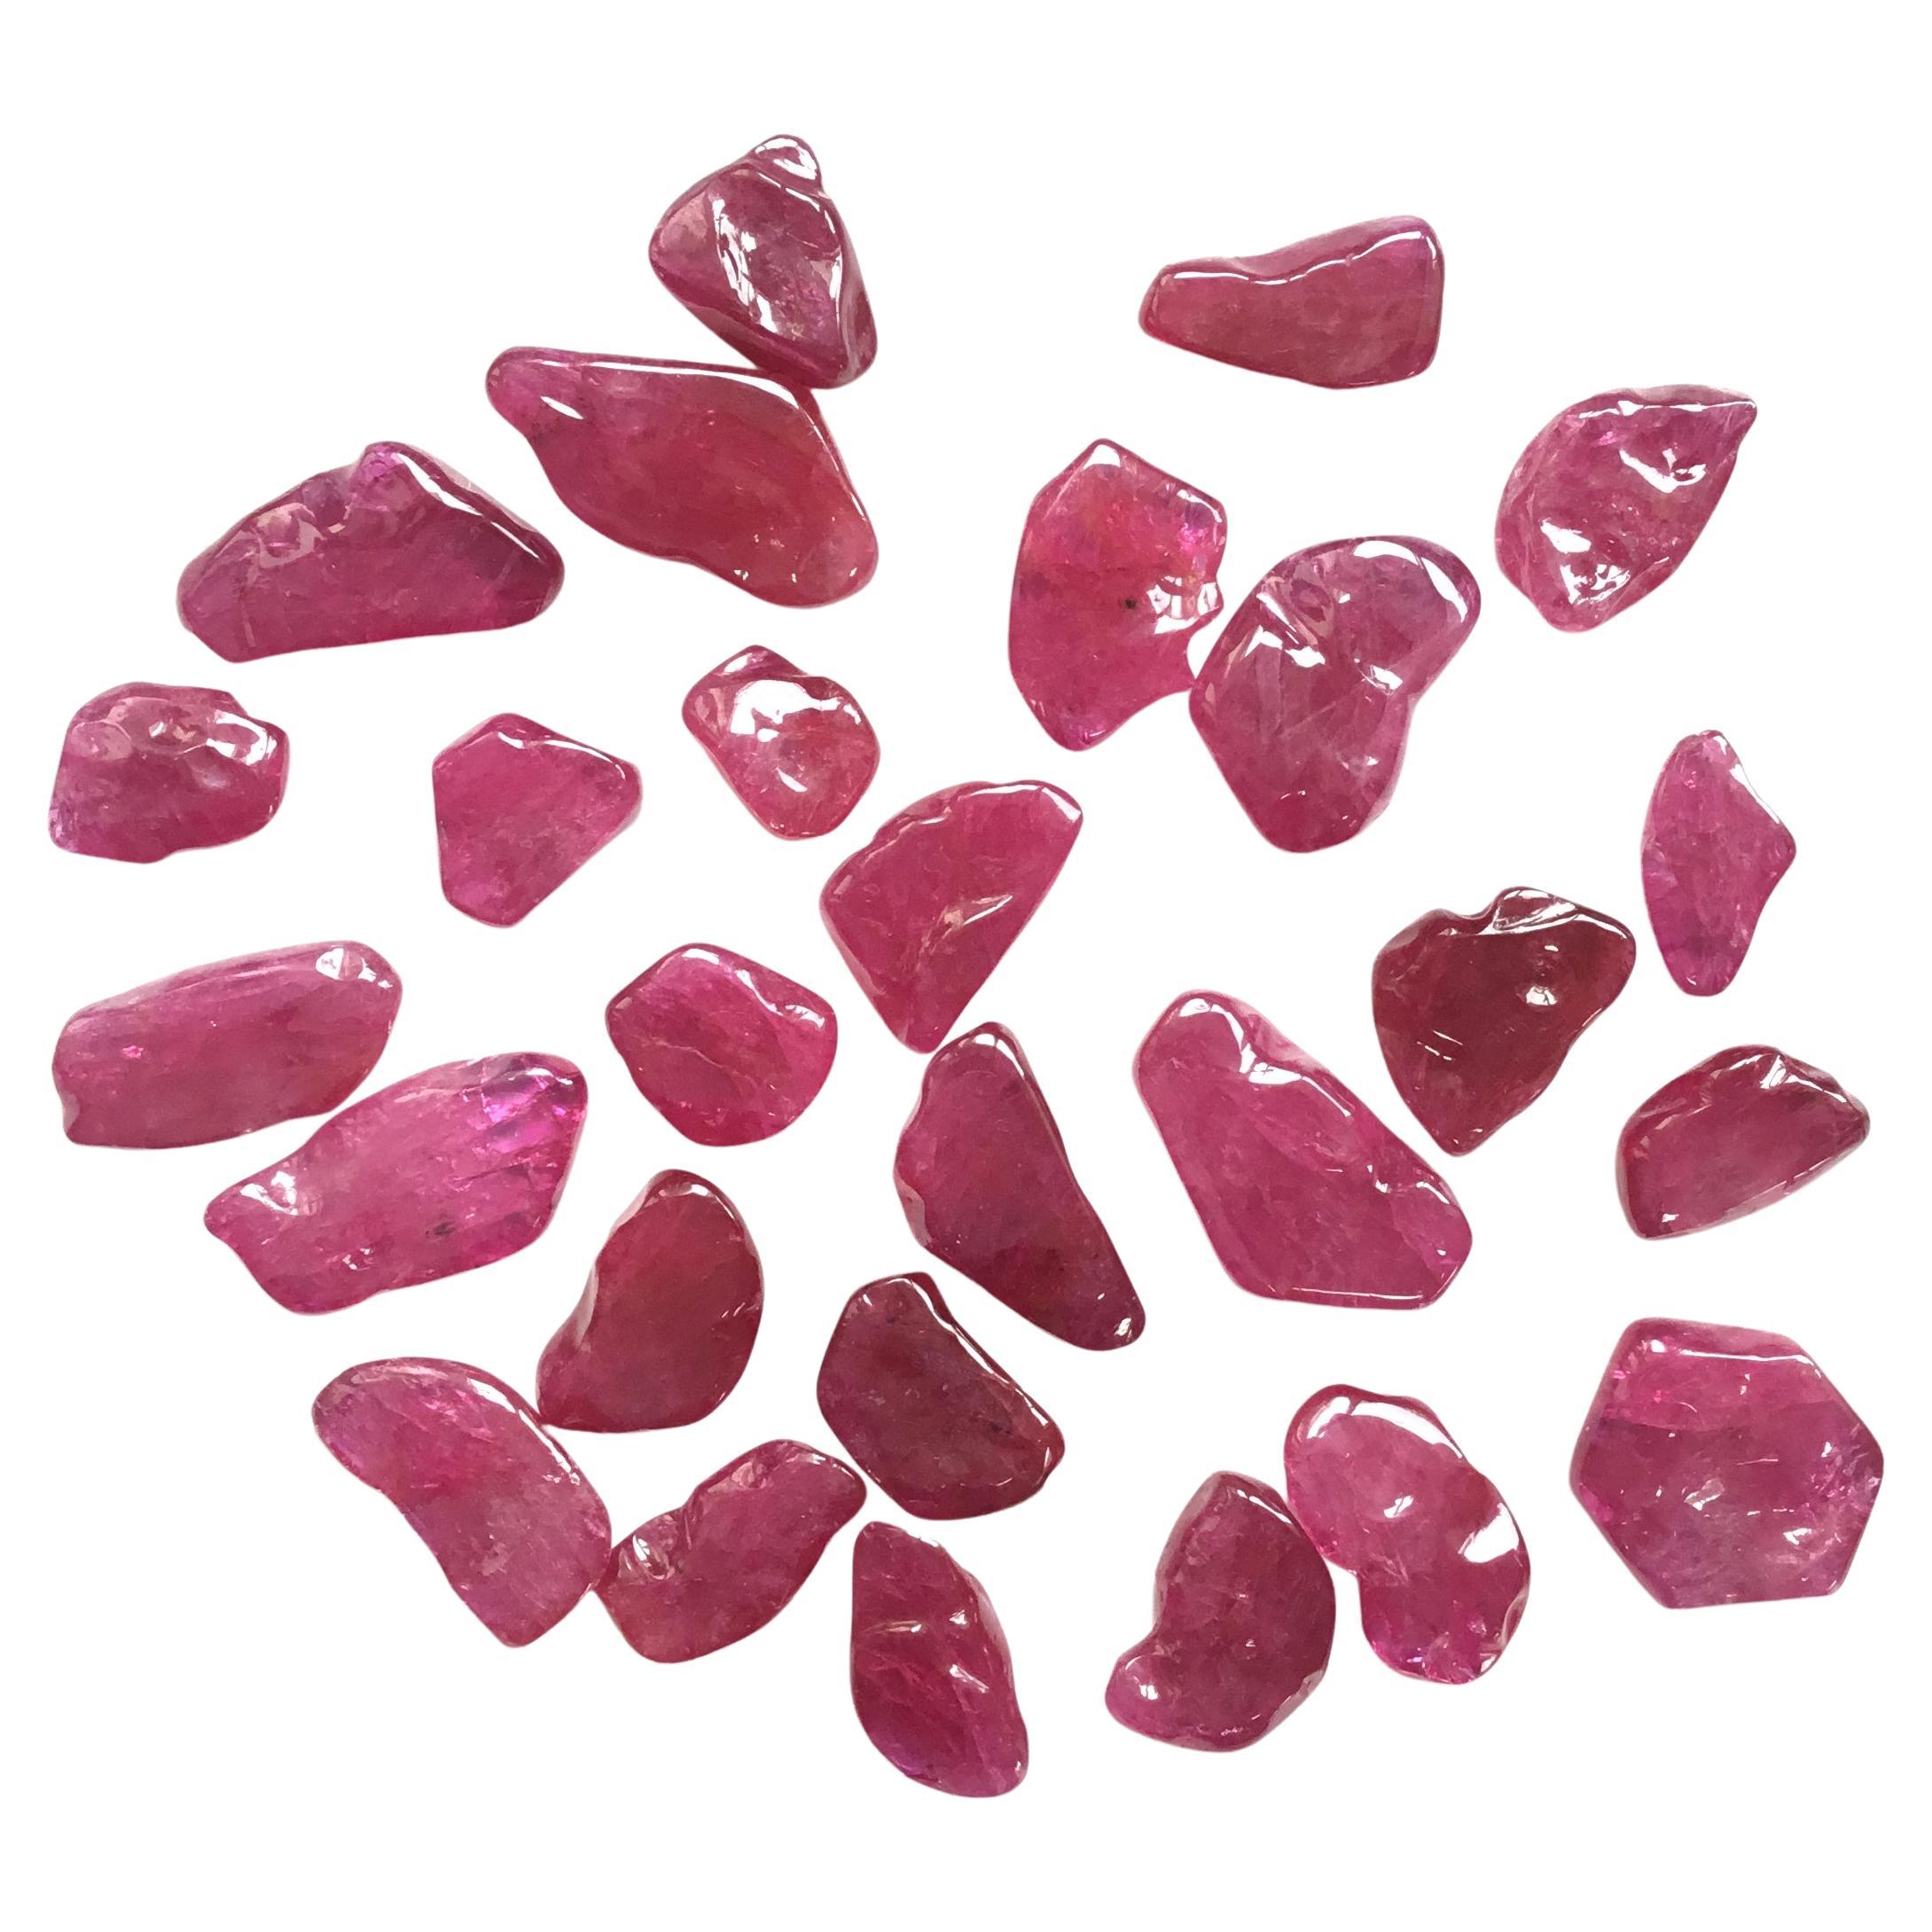 Top Quality Mozambique Ruby Natural Plain Tumble Gemstone For Jewelry Making  For Sale